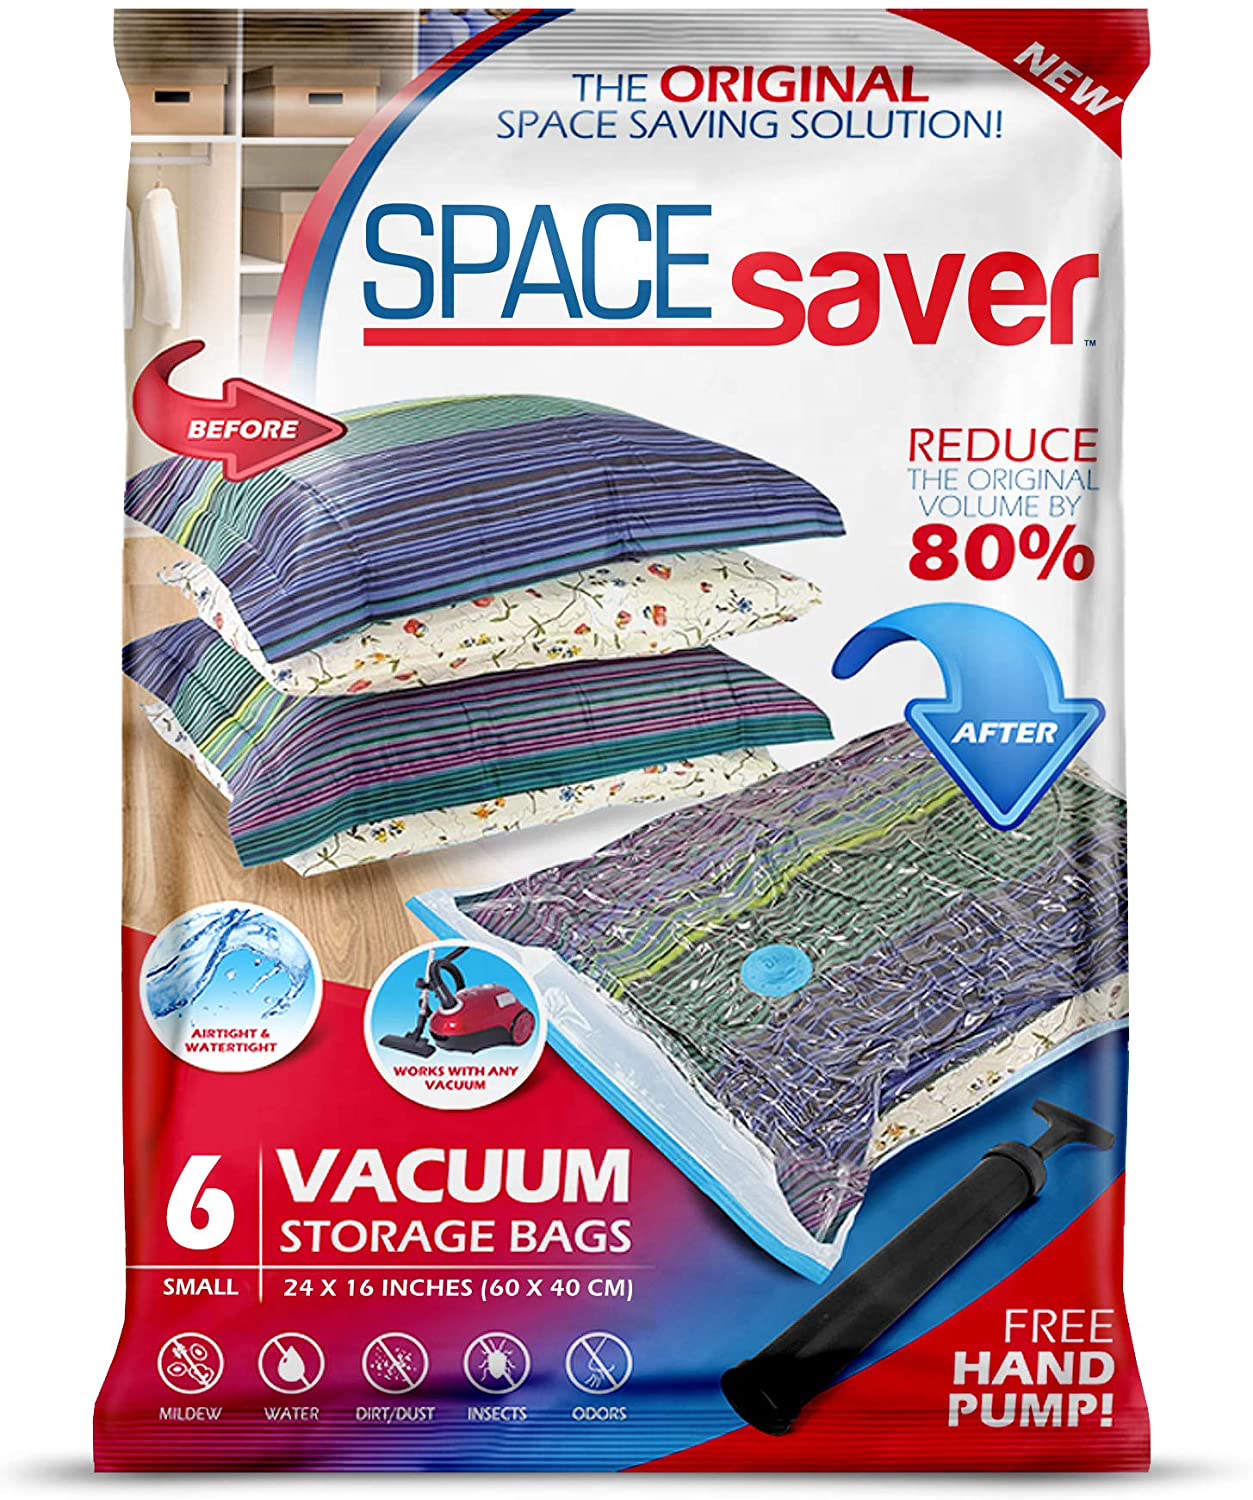 Spacesaver Premium Vacuum Storage Bags. 80% More Storage! Hand-Pump for Travel! Double-Zip Seal and Triple Seal Turbo-Valve for Max Space Saving! (Small 6 Pack)